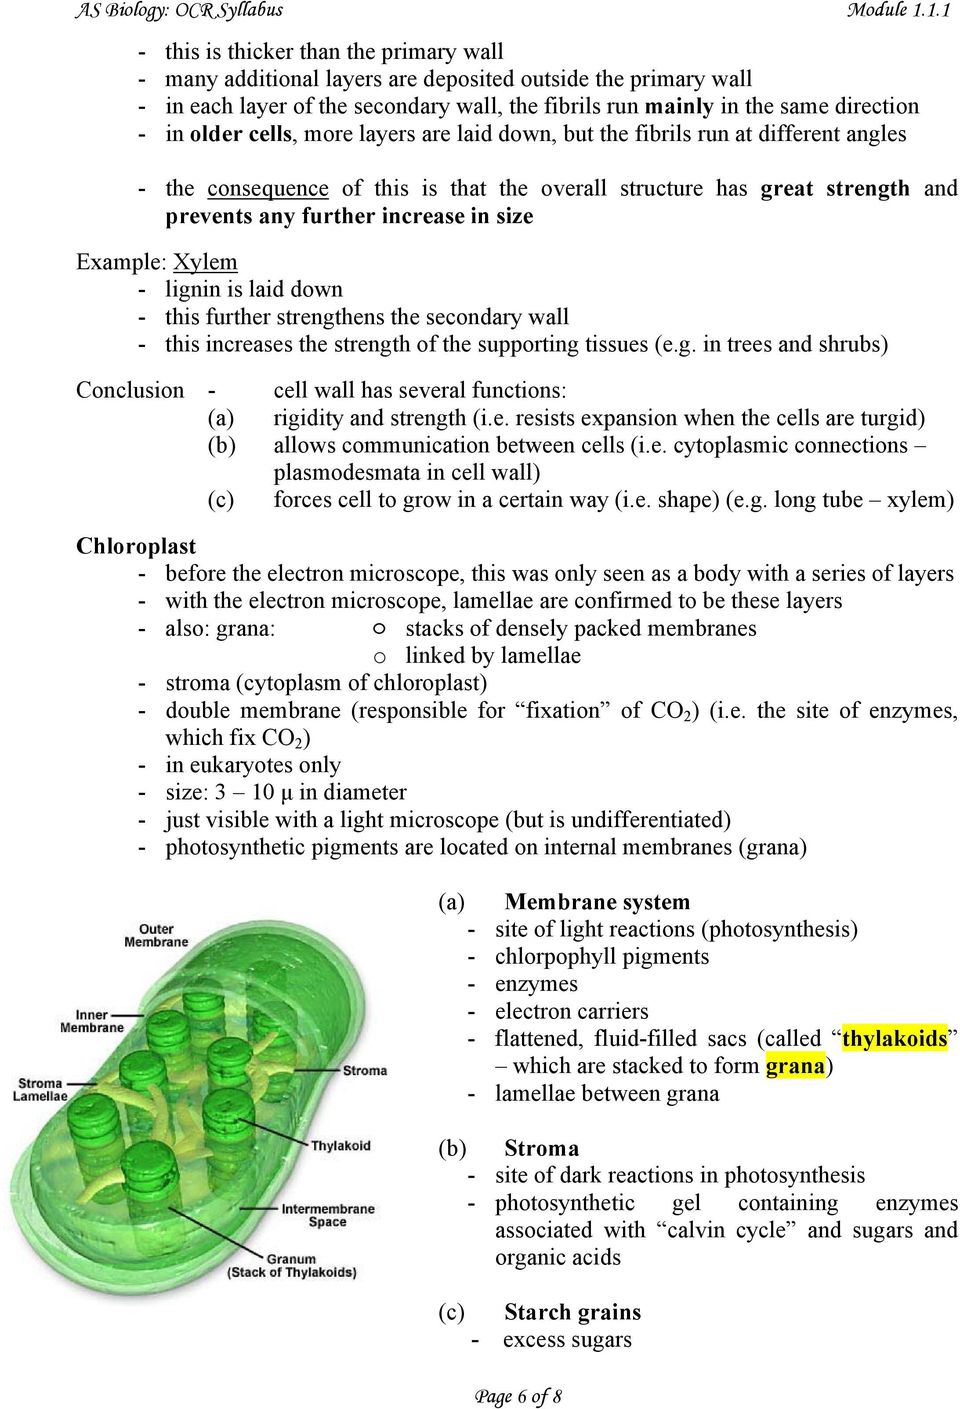 Xylem - lignin is laid down - this further strengthens the secondary wall - this increases the strength of the supporting tissues (e.g. in trees and shrubs) Conclusion - cell wall has several functions: (a) rigidity and strength (i.